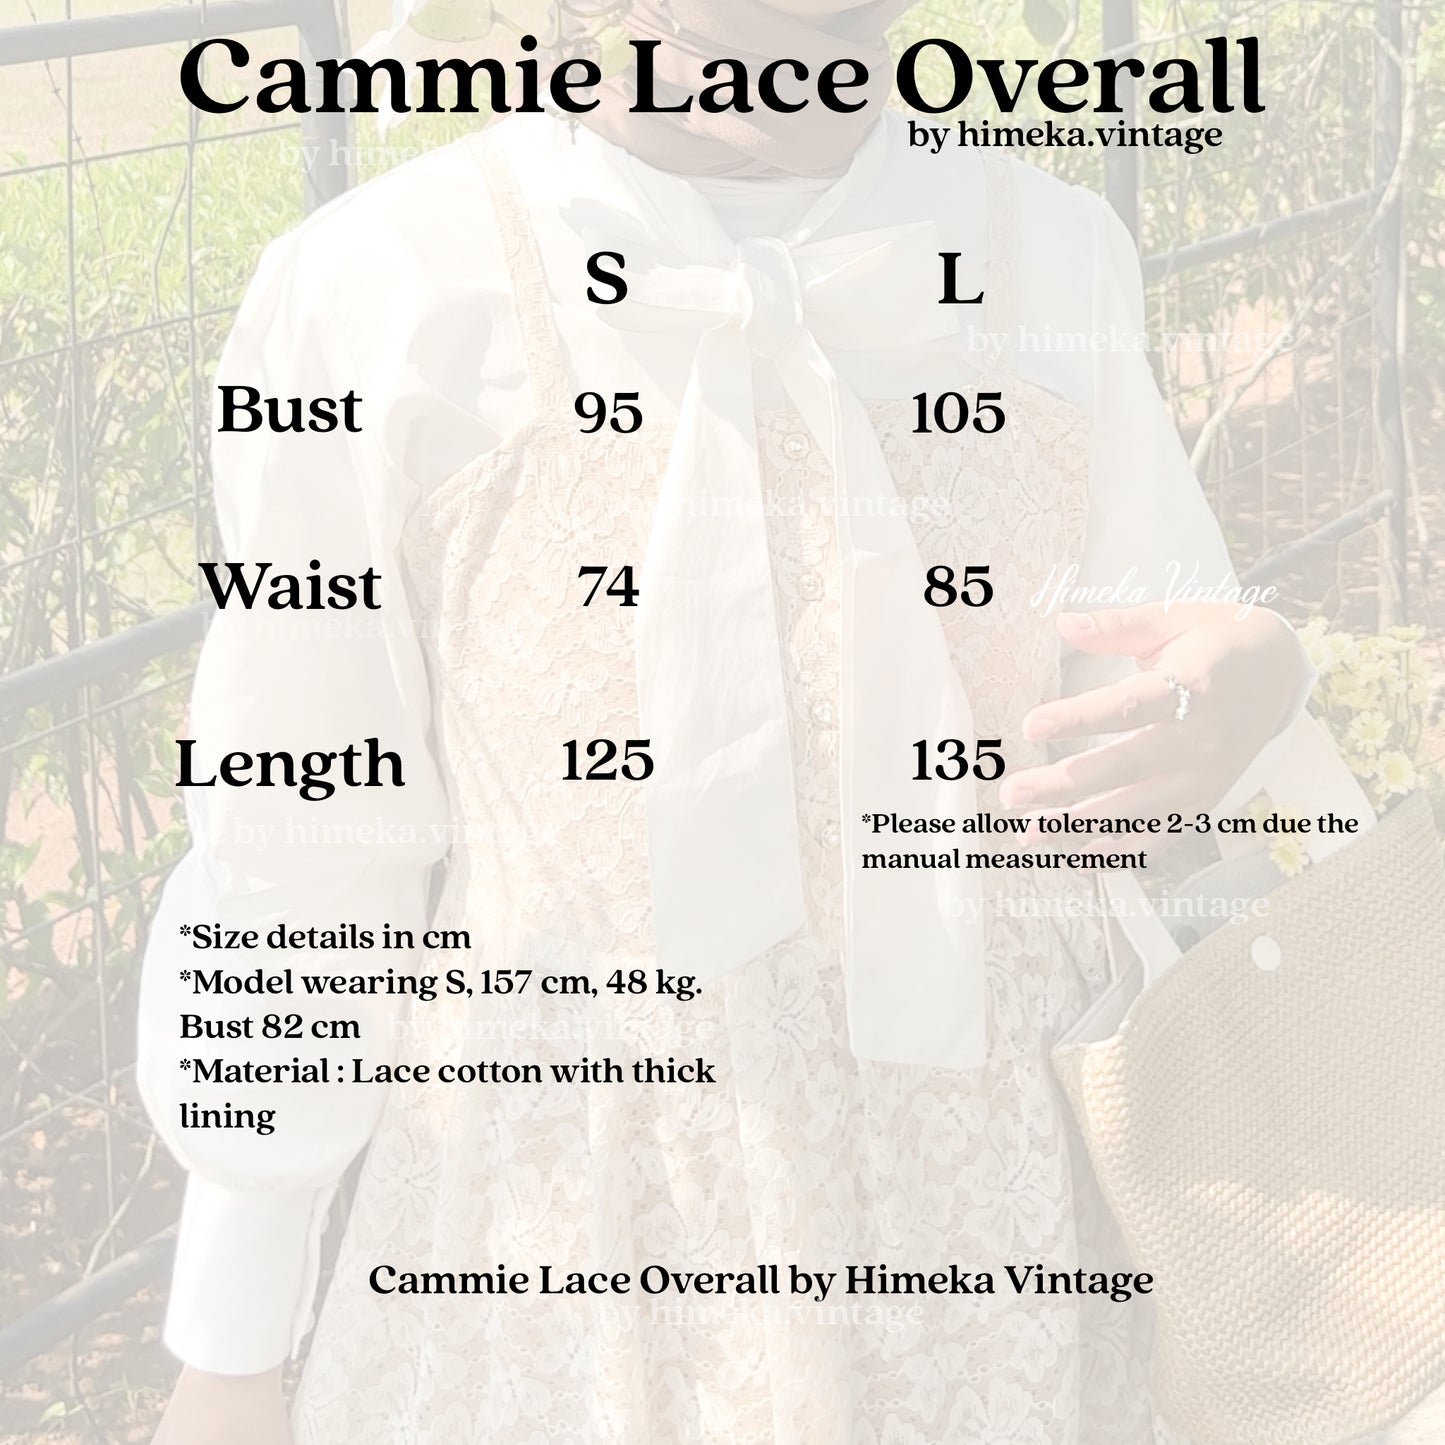 Cammie Lace Overall by Himeka Vintage Official